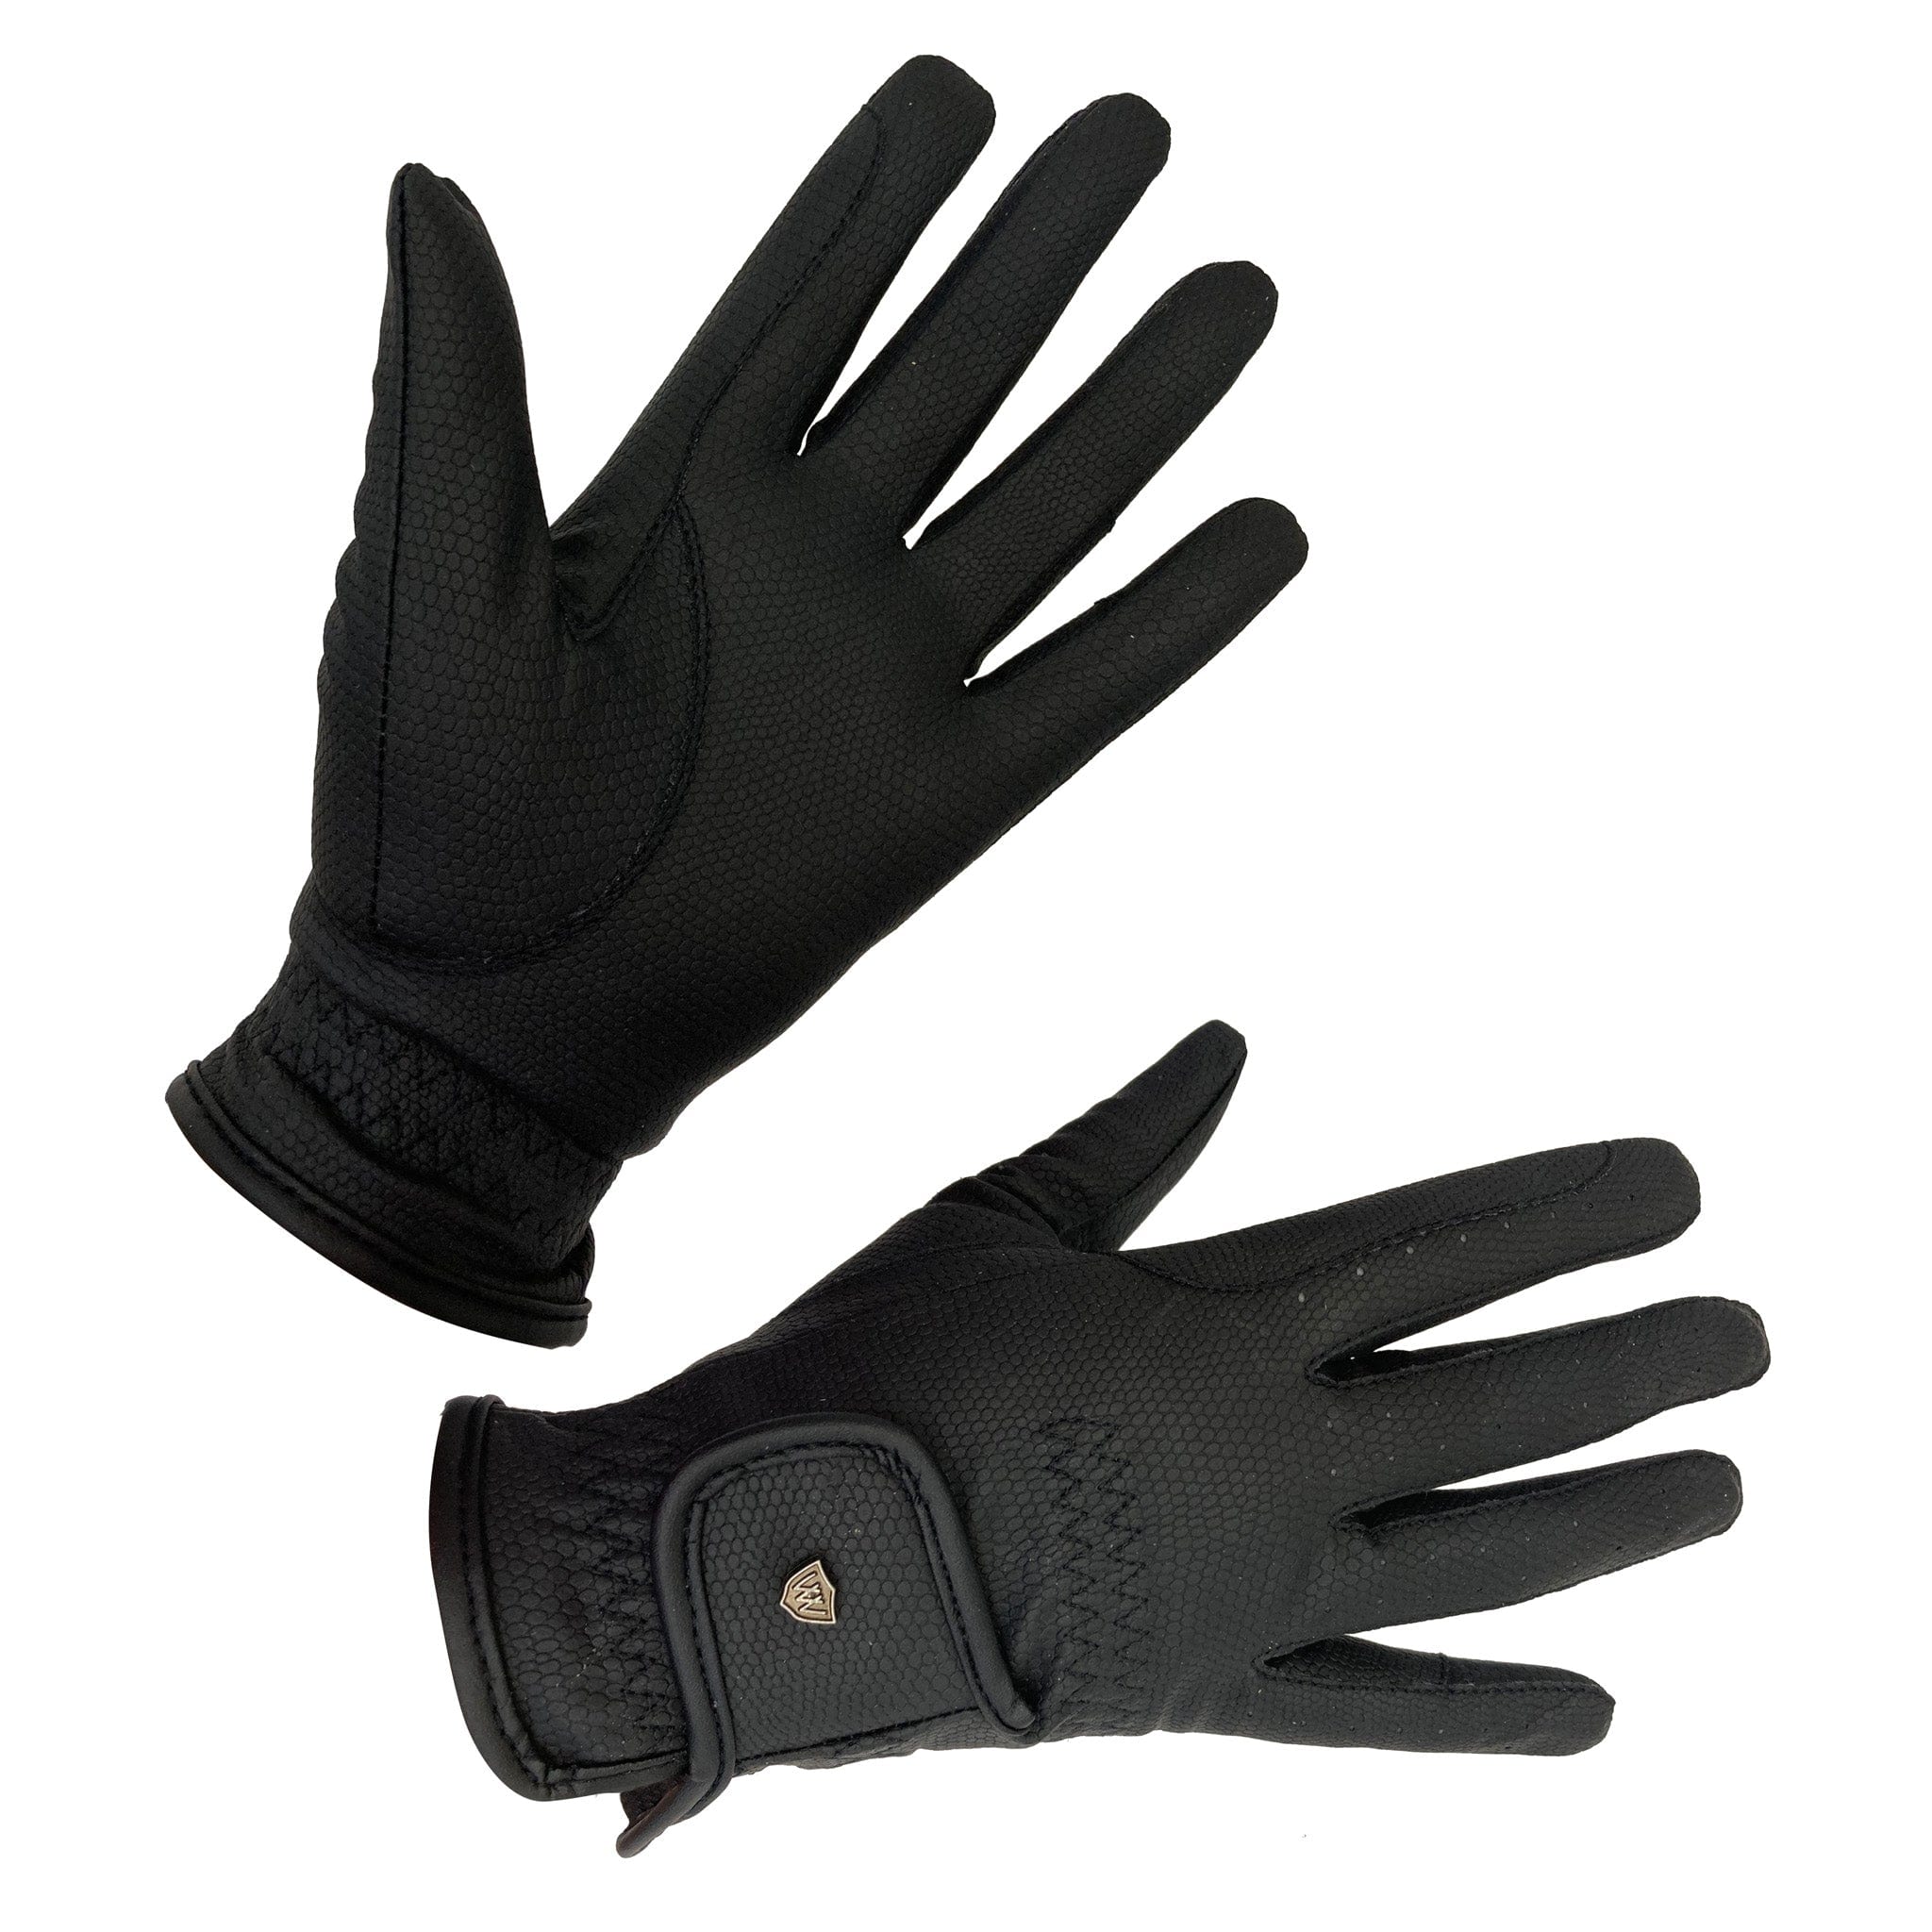 Woof Wear Competition Riding Gloves WG0122 Black Pair